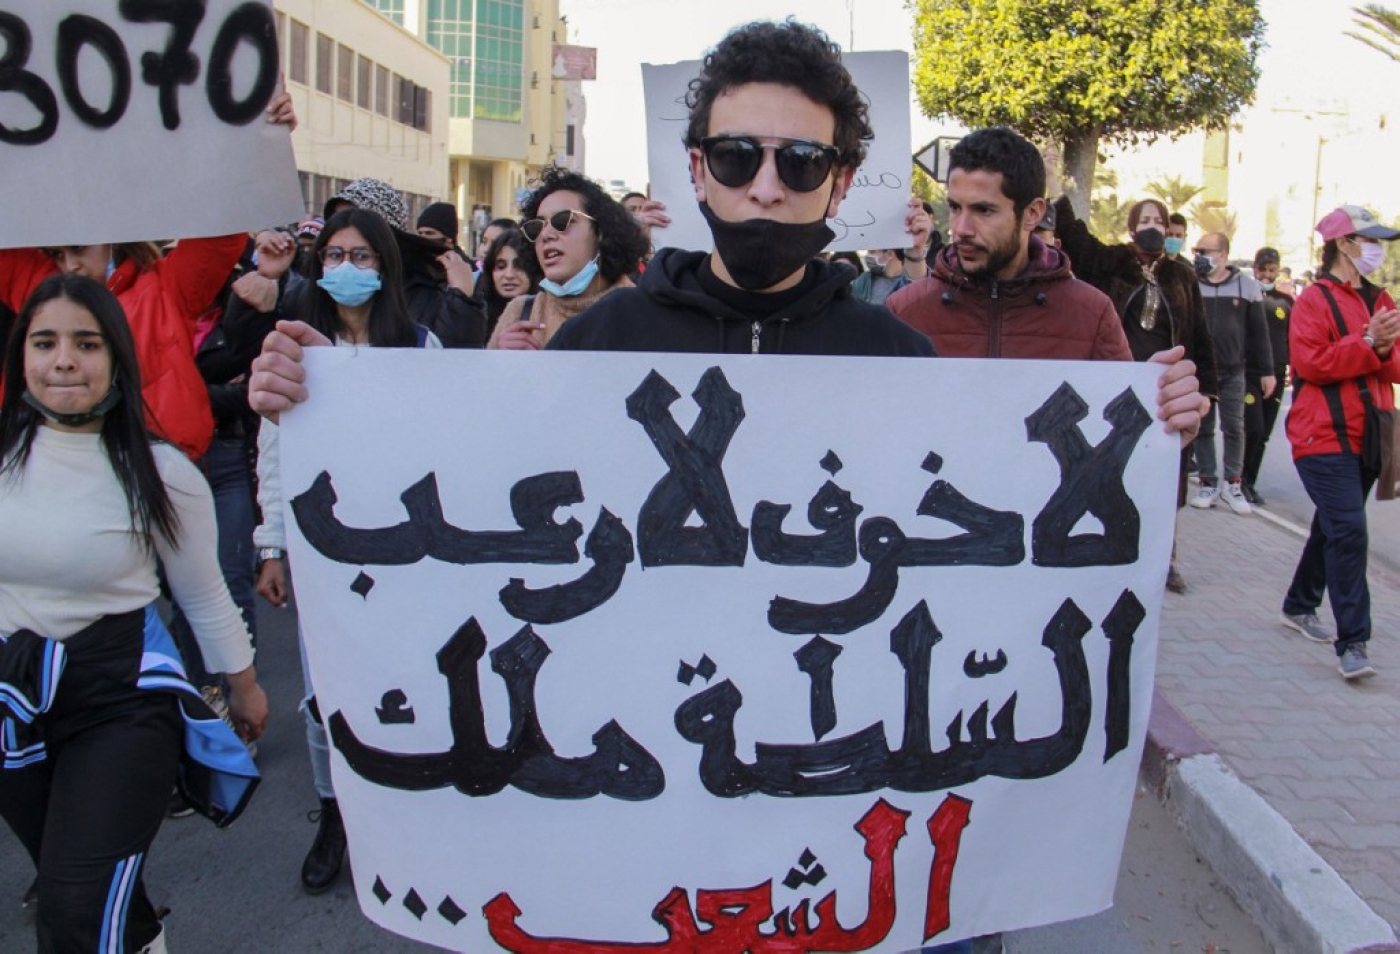 Tunisian protesters lift placards and chant during an anti-government demonstration in the coastal city of Sfax on 19 January 2021.